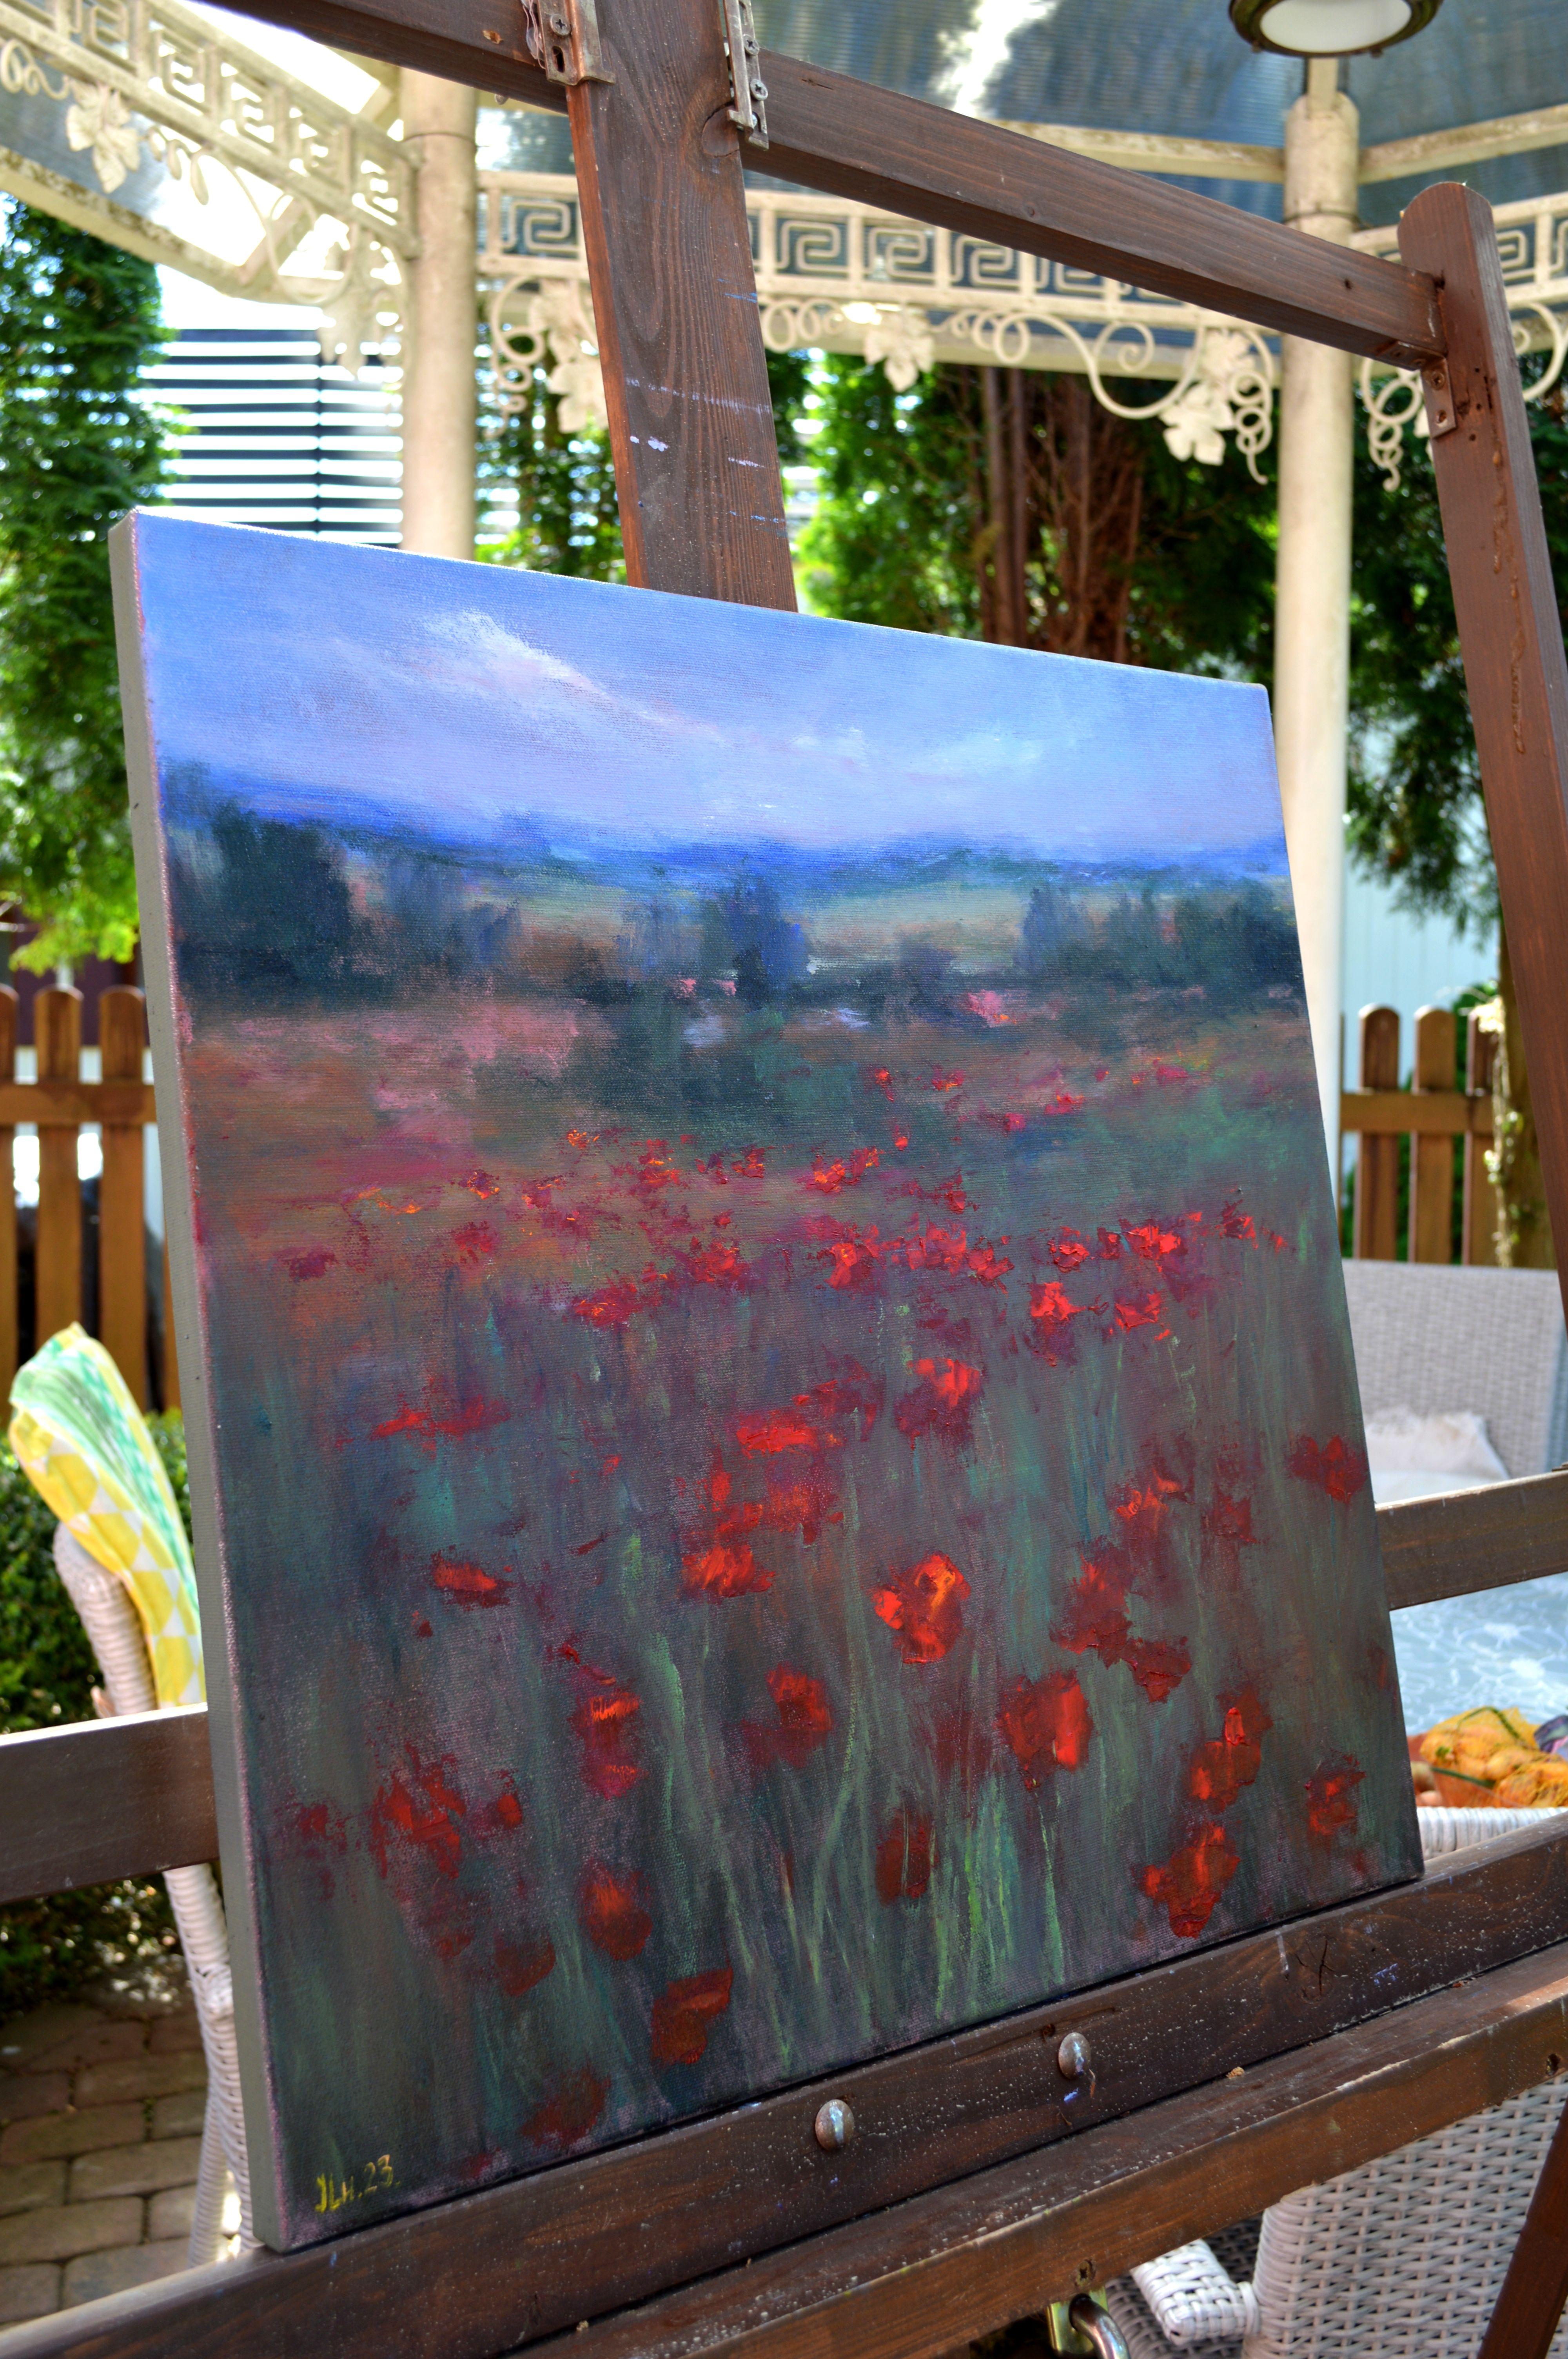 In creating this piece, I've poured my soul into the vivid crimson blooms, contrasting against the subdued greens and blues, evoking life's vibrancy. Each stroke is a breath, blending impressionism with realism to capture nature's fleeting beauty.